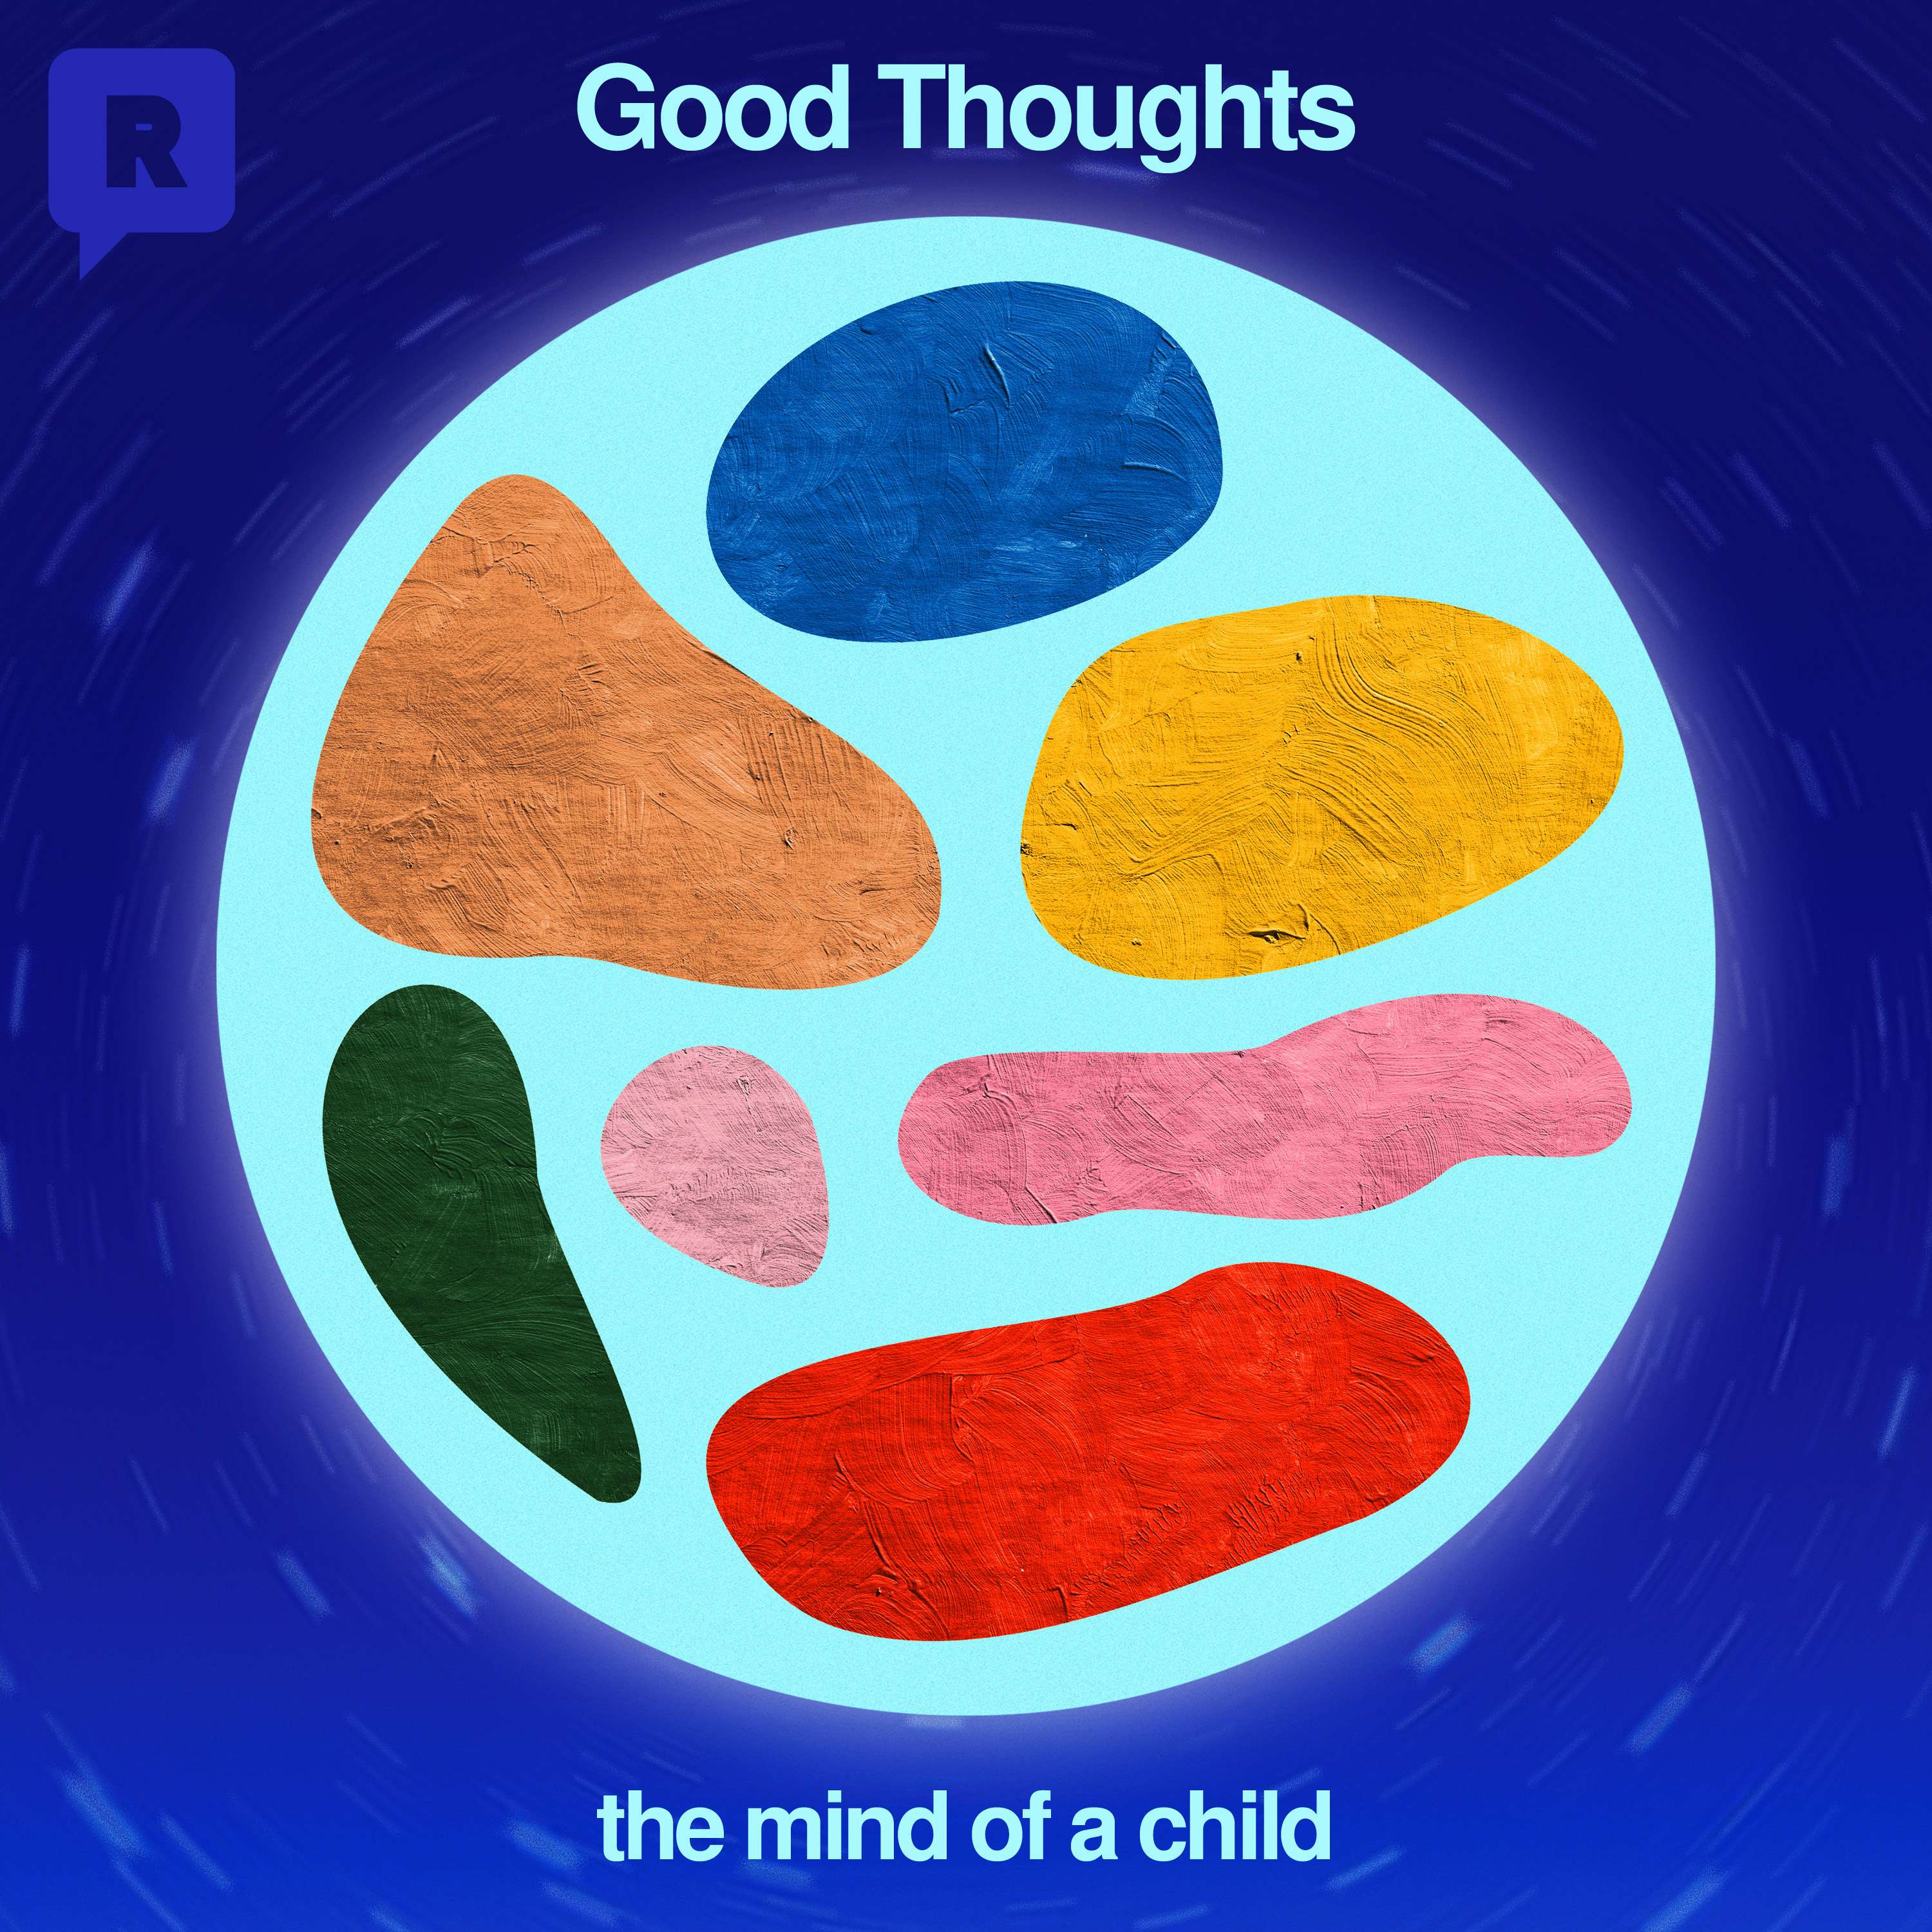 Good Thoughts: 'My Clubhouse', John 14:1-7, and 'Old Mother Goose'